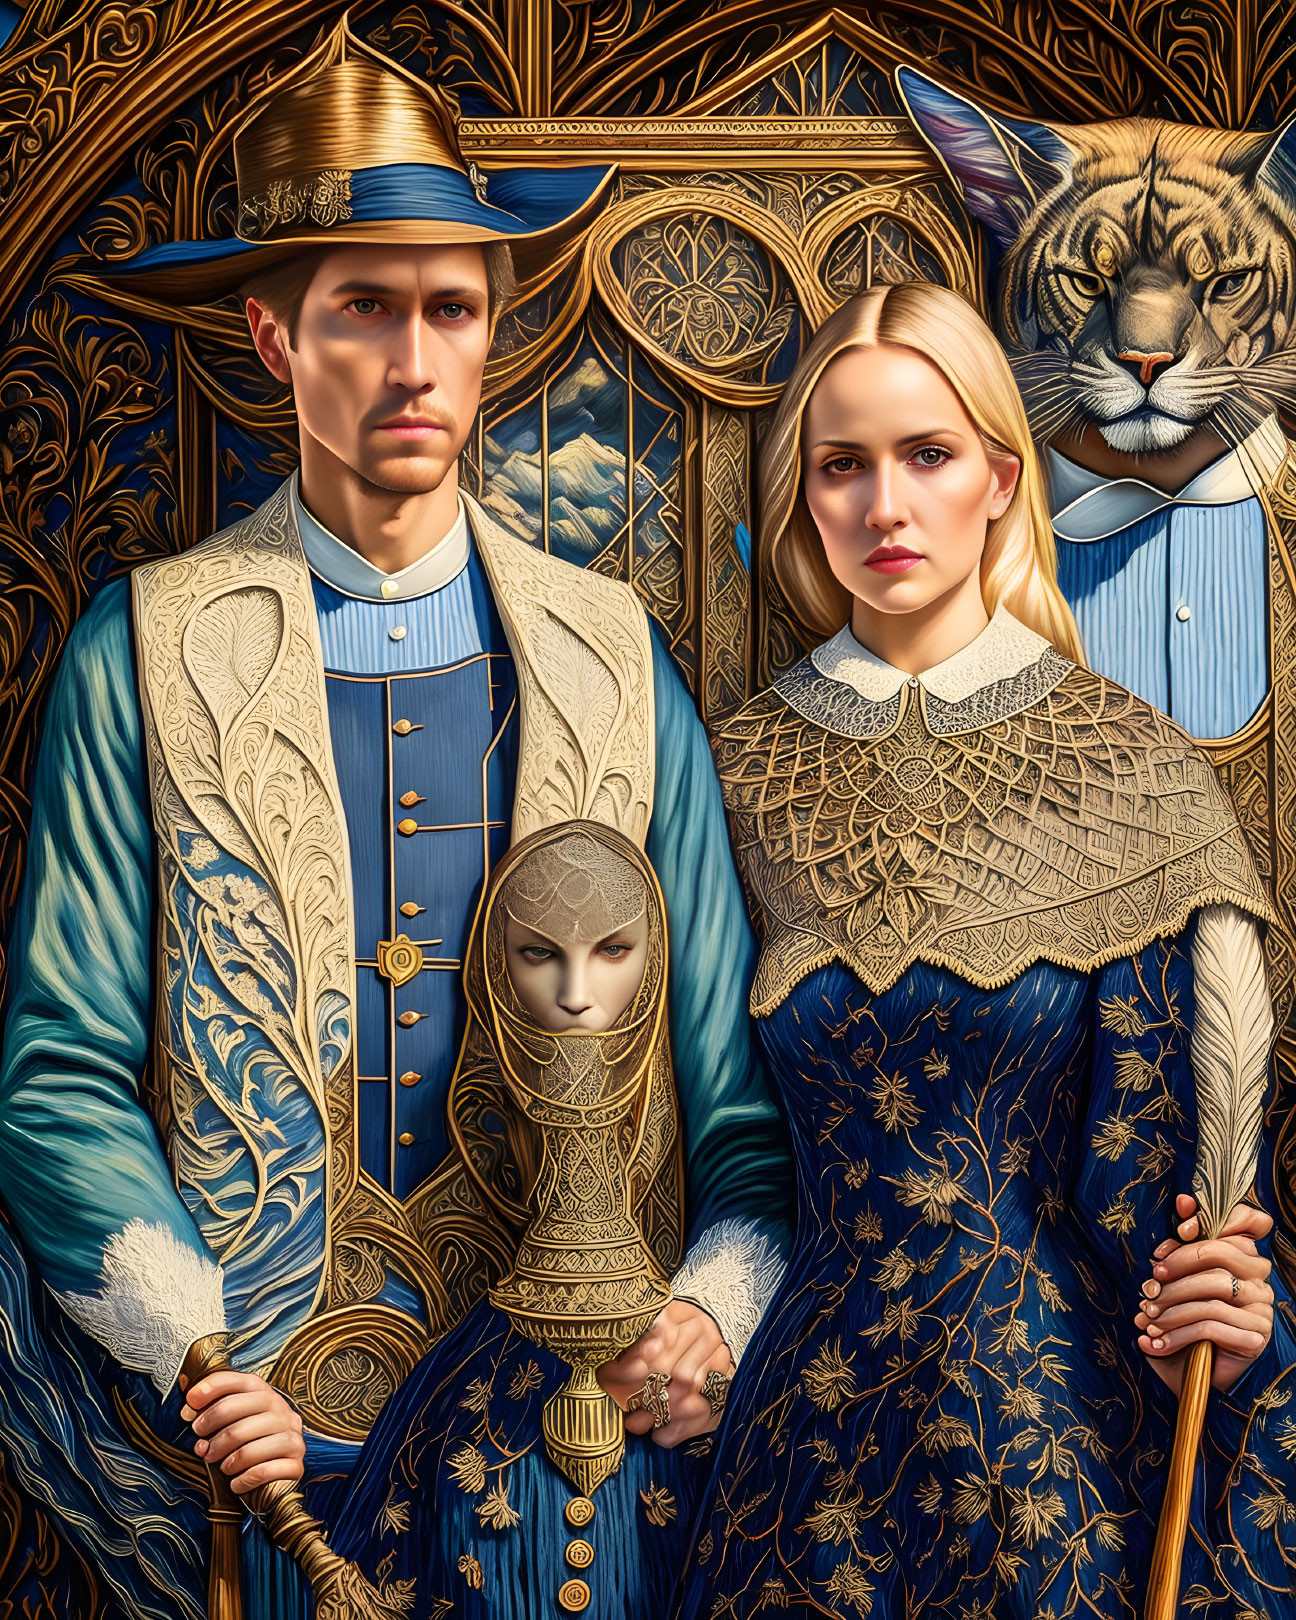 Stylized portrait of man and woman in historical attire with tiger head and metallic mask